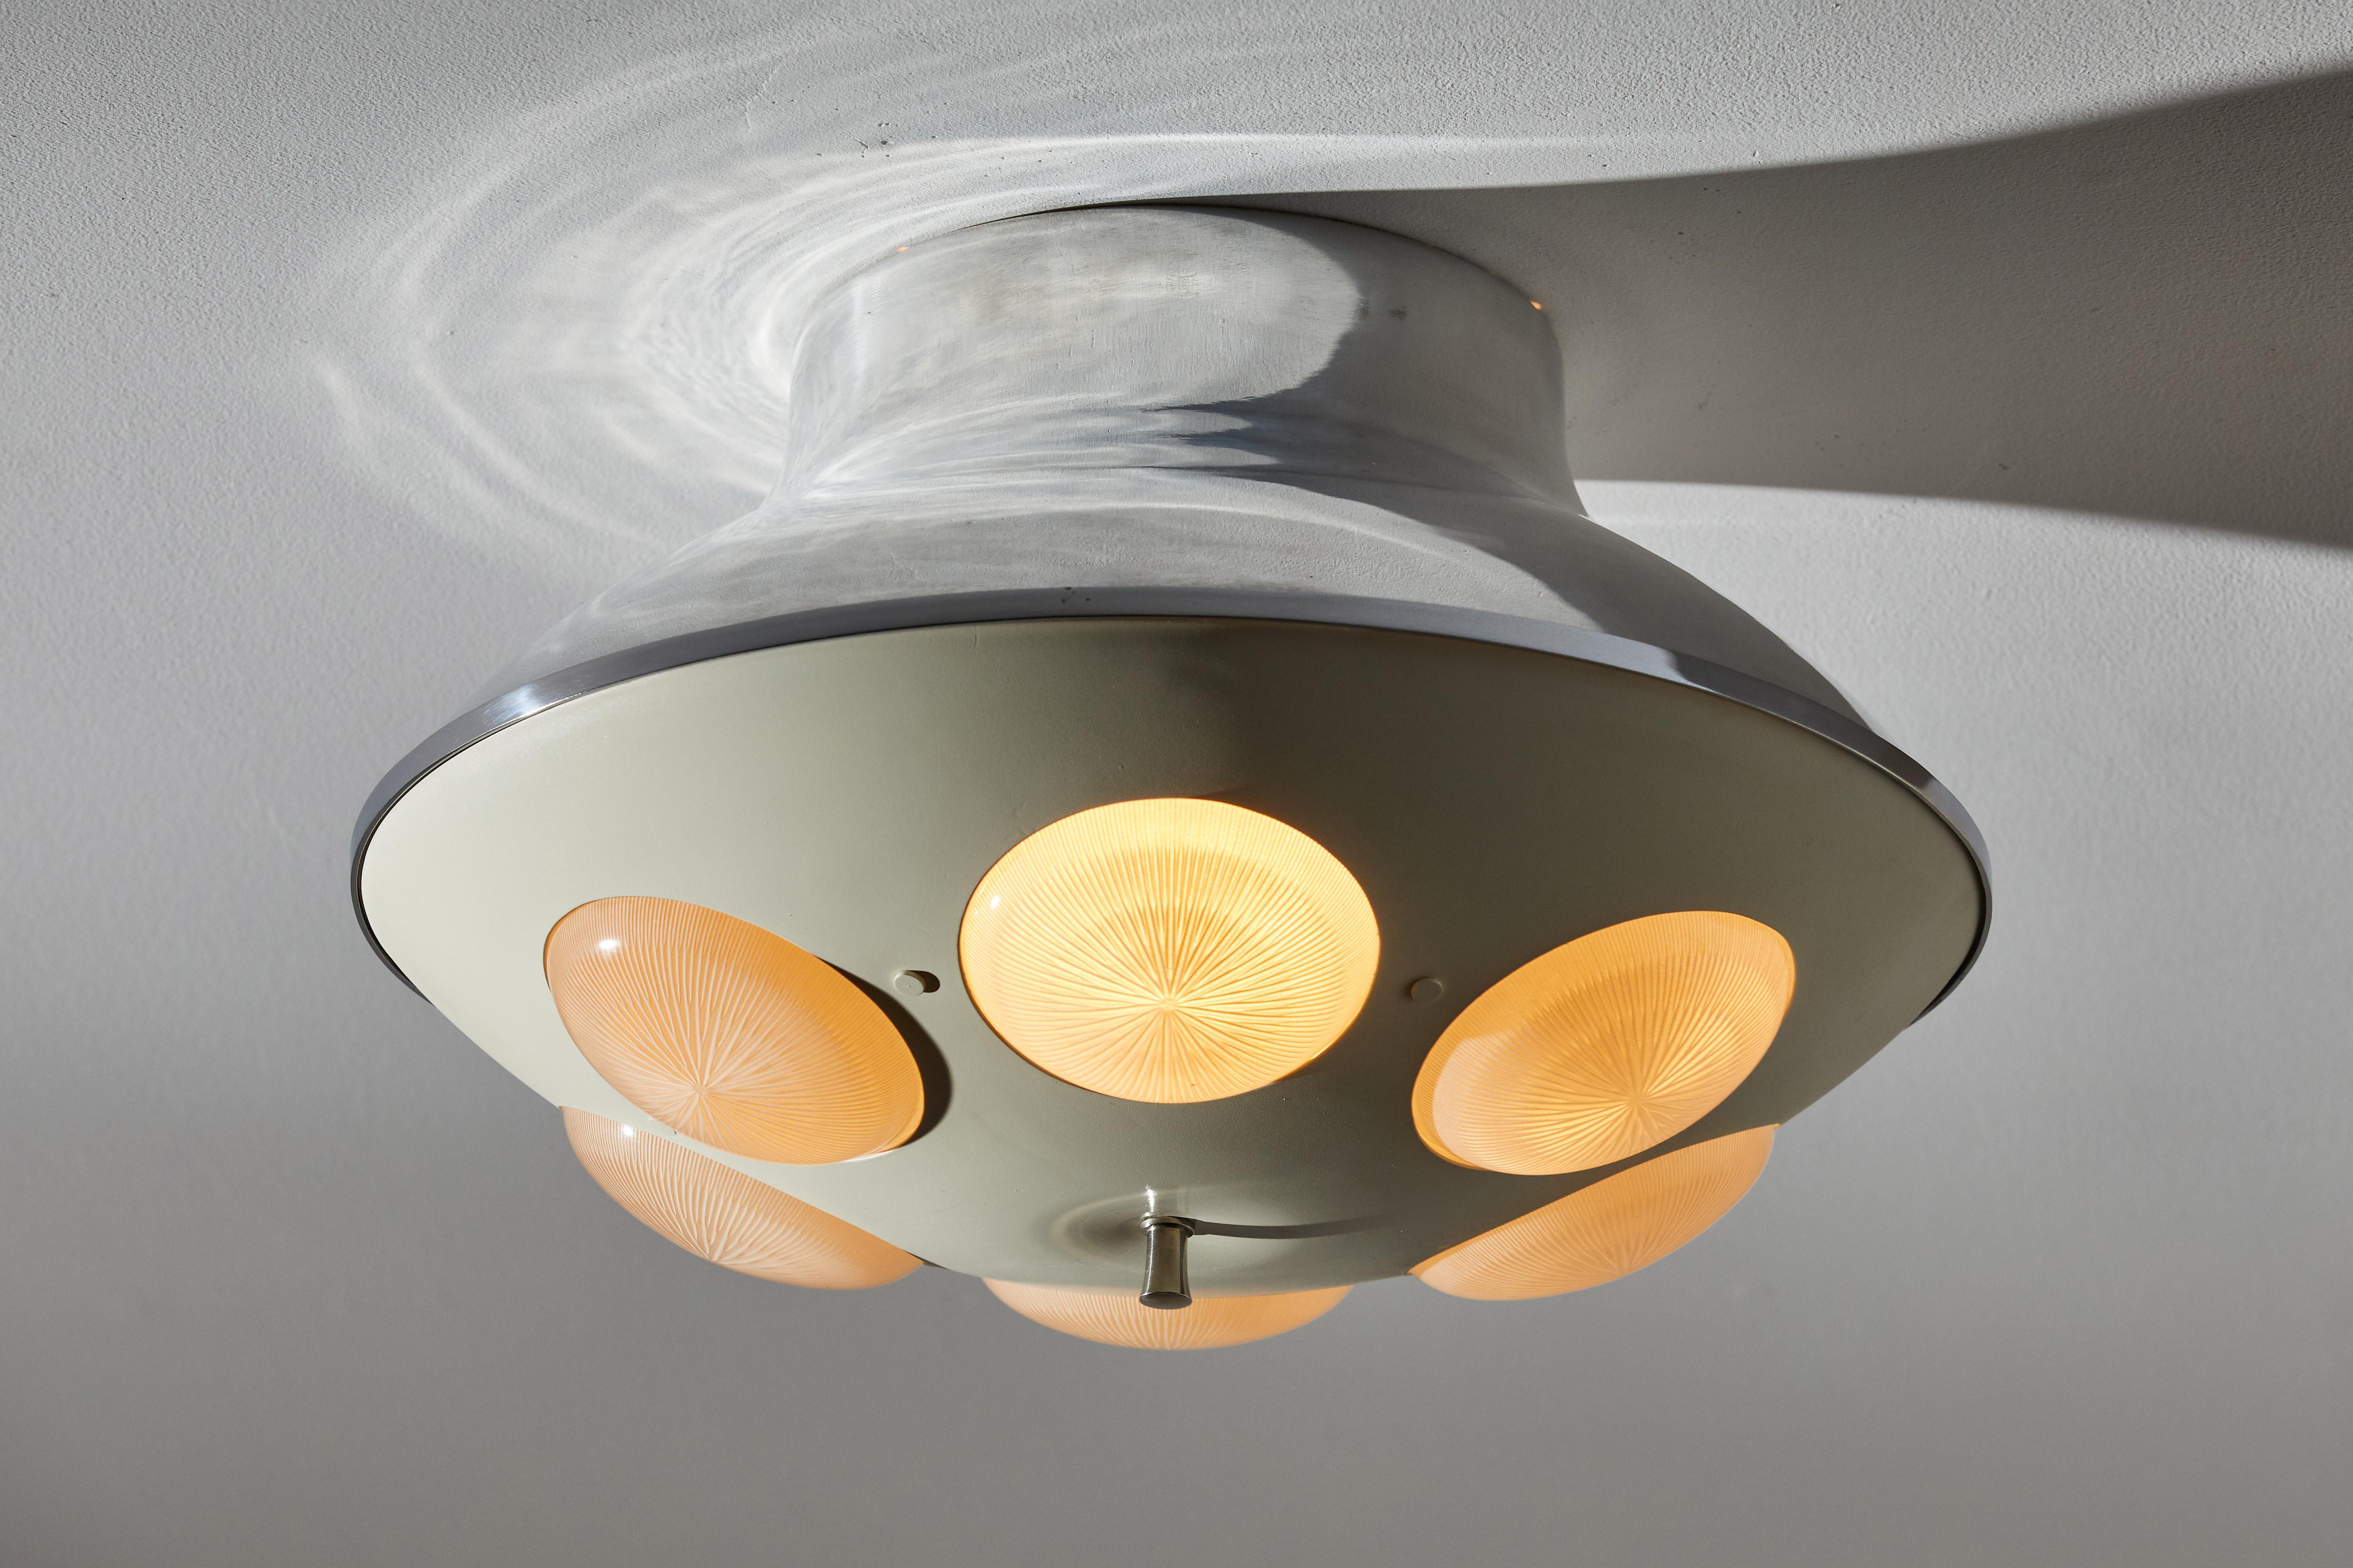 Flush mount ceiling light by Lumi. Manufactured in Italy, circa 1960s. Enameled metal, Holophane glass diffusers, brass hardware. Rewired for U.S. junction boxes. Takes three E27 candelabra bulbs and one Edison bulb. Bulbs provided as a onetime